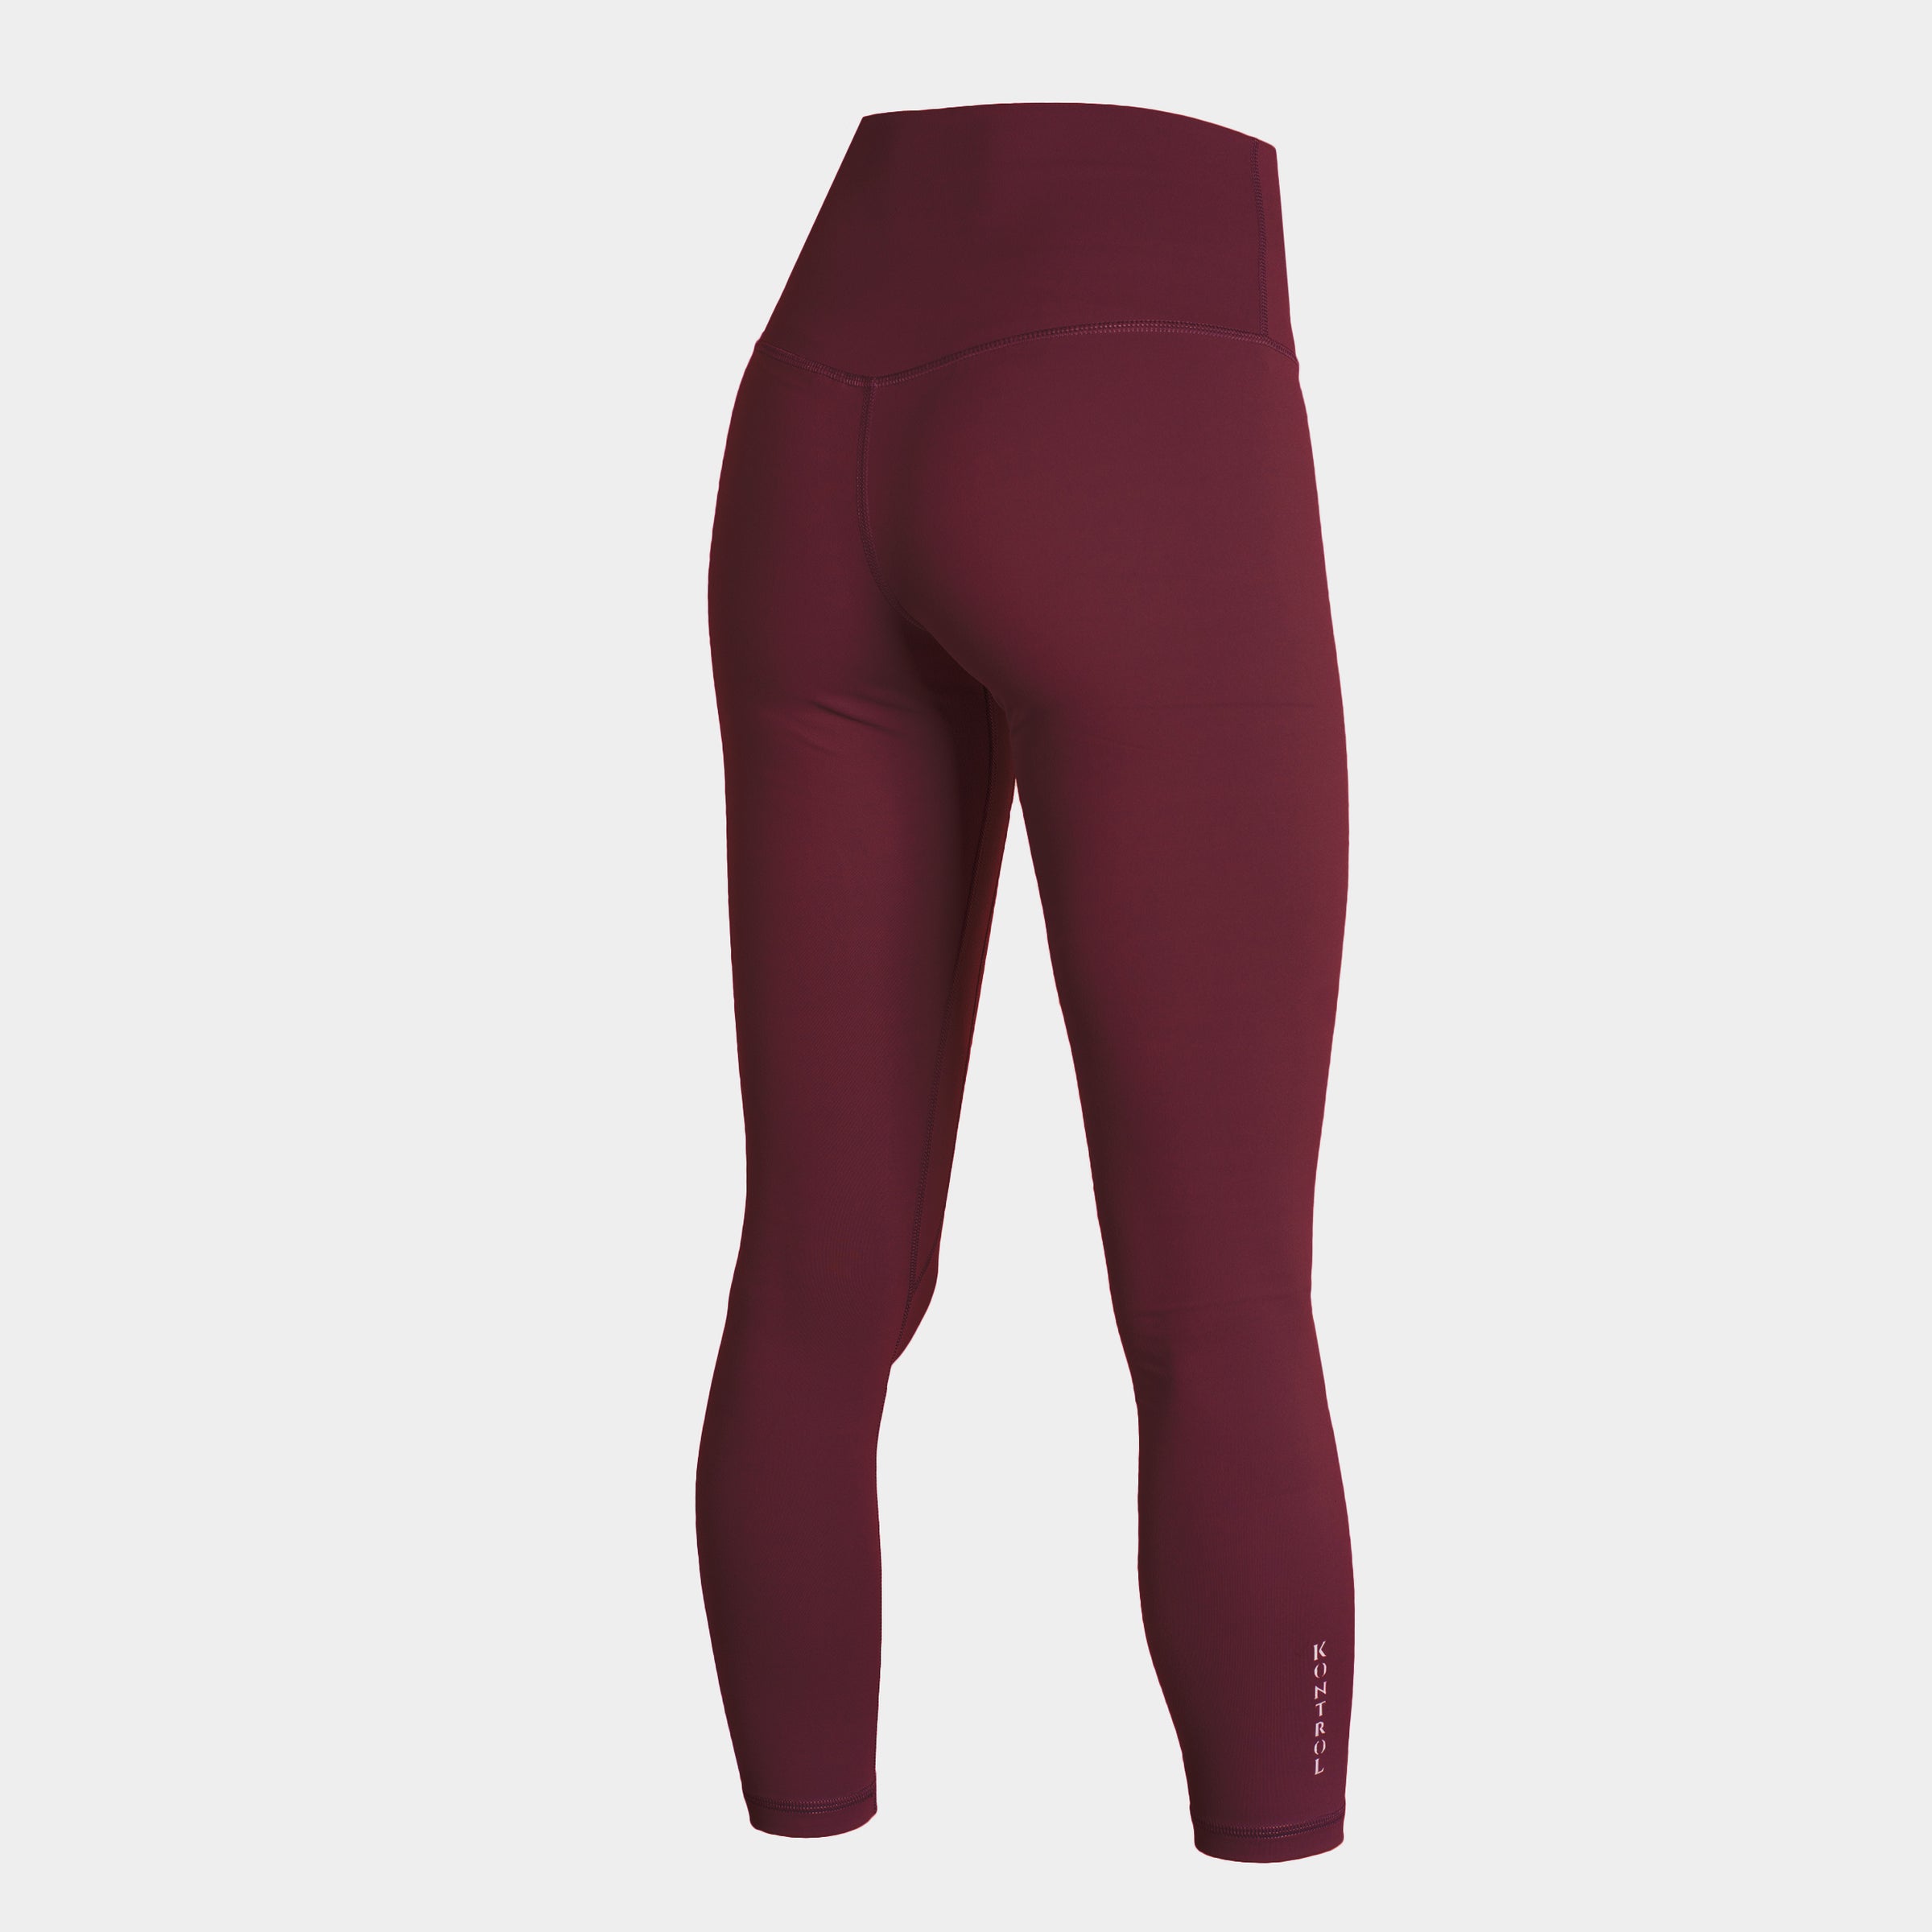 Buttery soft leggings with side pockets yoga pants – Otos active